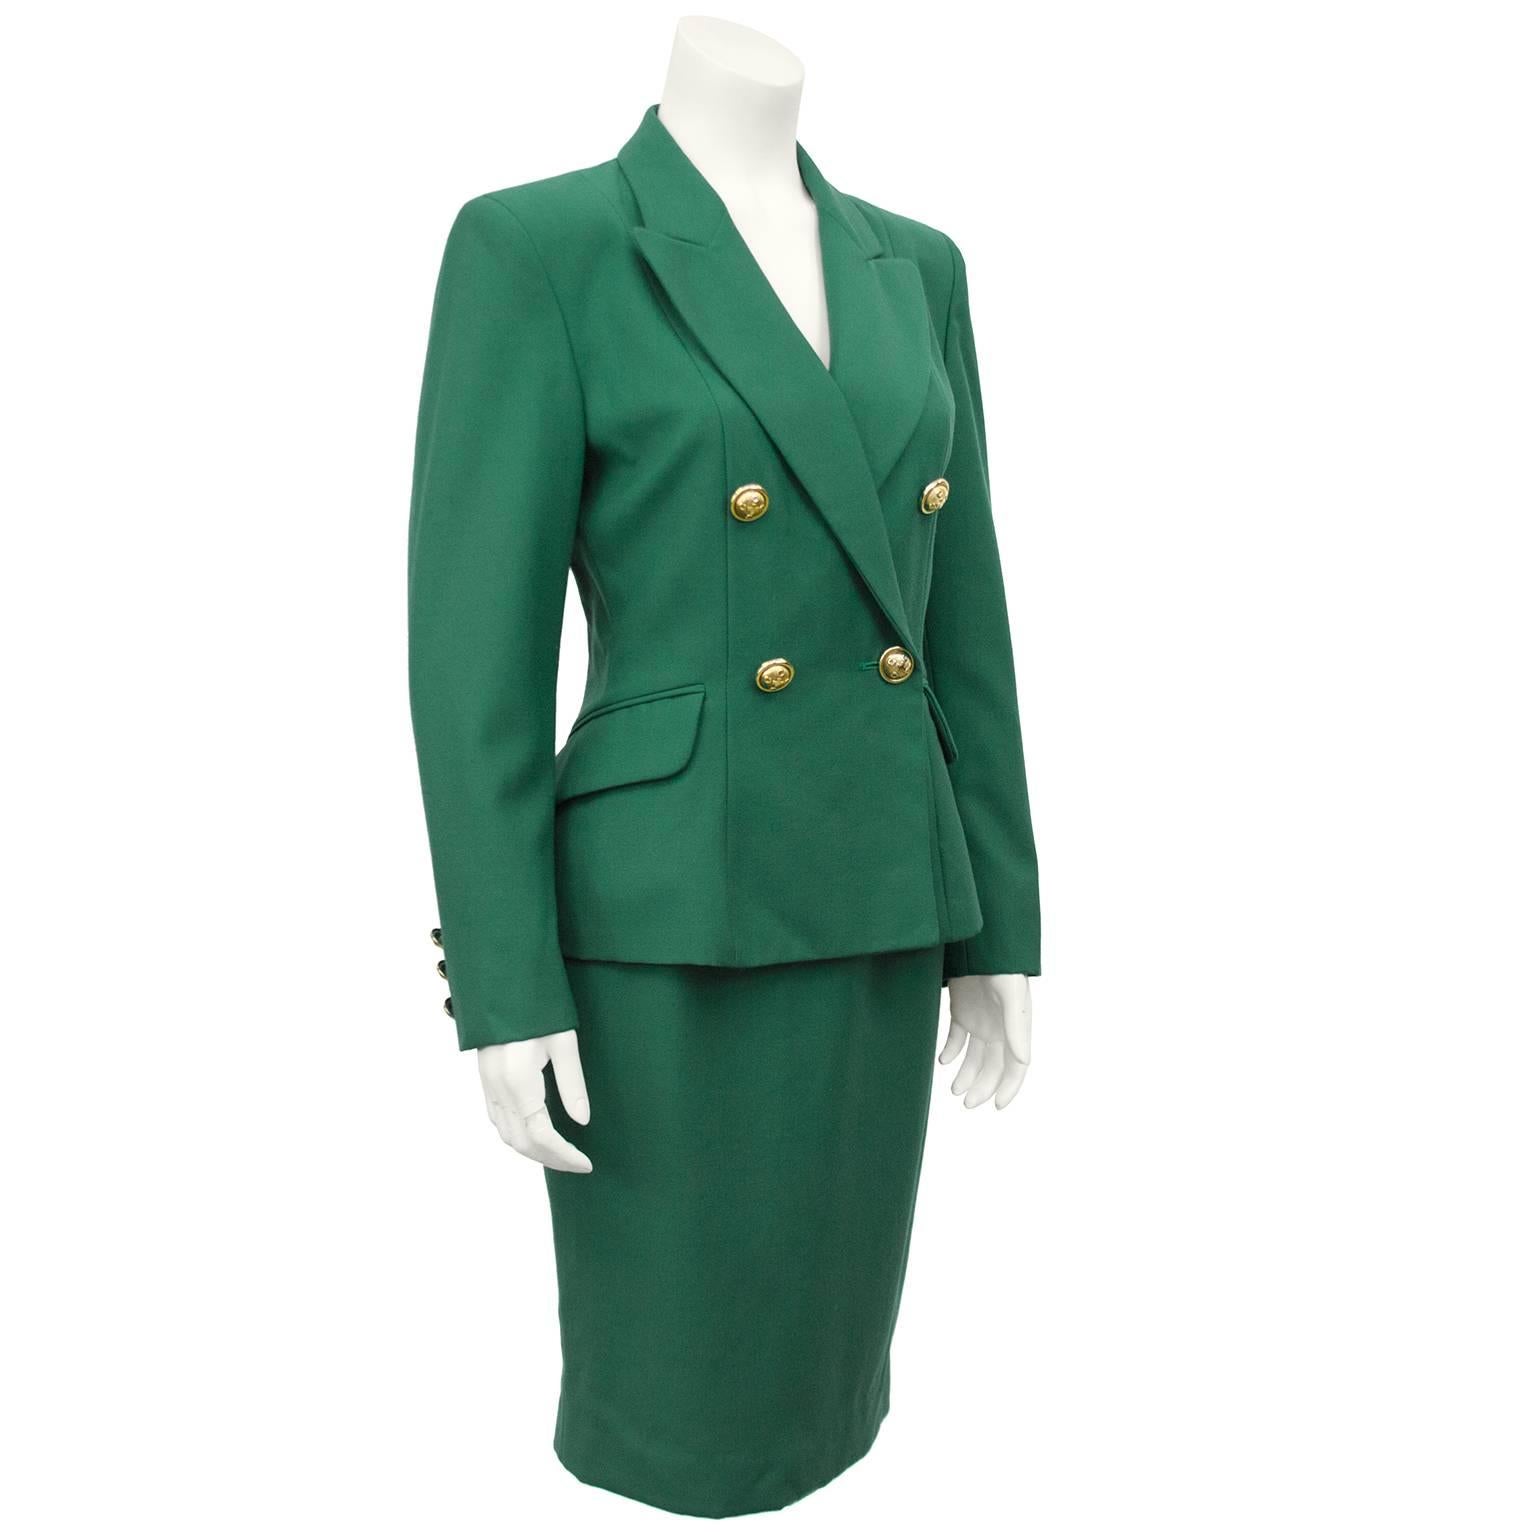 Moschino Cheap and Chic wool Kelly green skirt suit dating from the early 1980s. Double breasted jacket with large gold detailed buttons with crosses and c logos and a fitted waist. High waisted pencil skirt. Can be worn together of separately.